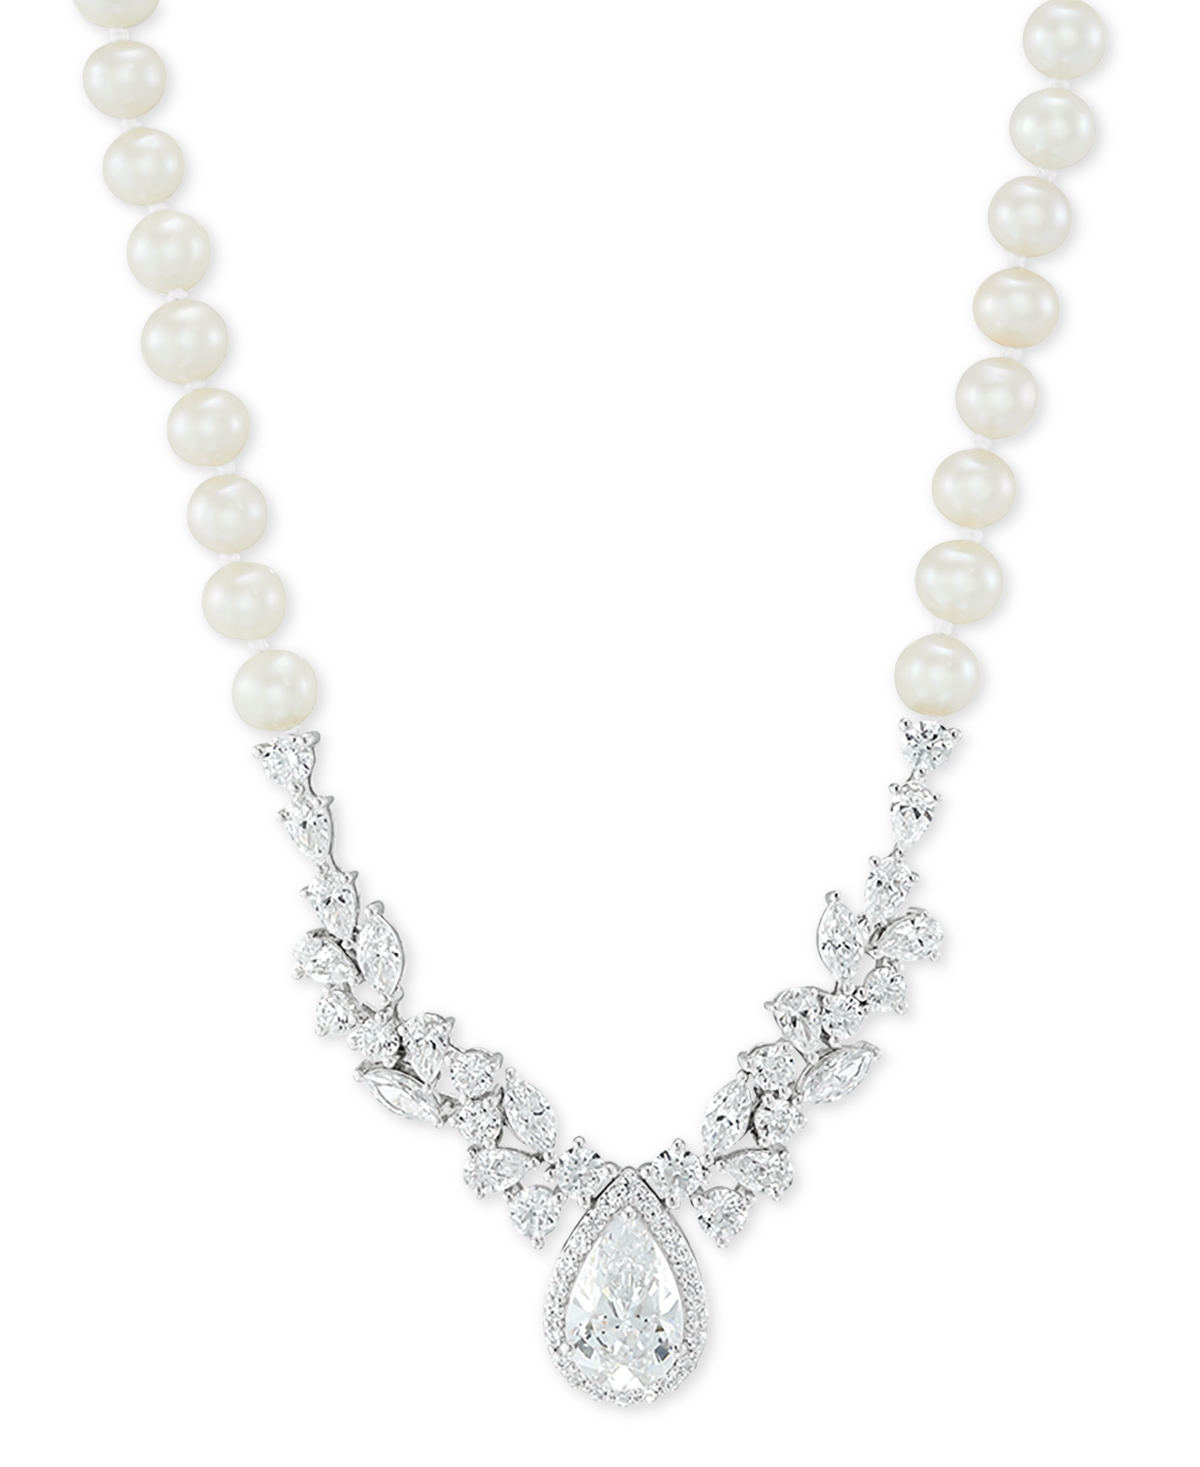 Cultured Freshwater Pearl (5-6mm) Cubic Zirconia 17" Statement Necklace in Sterling Silver - Sterling Silver